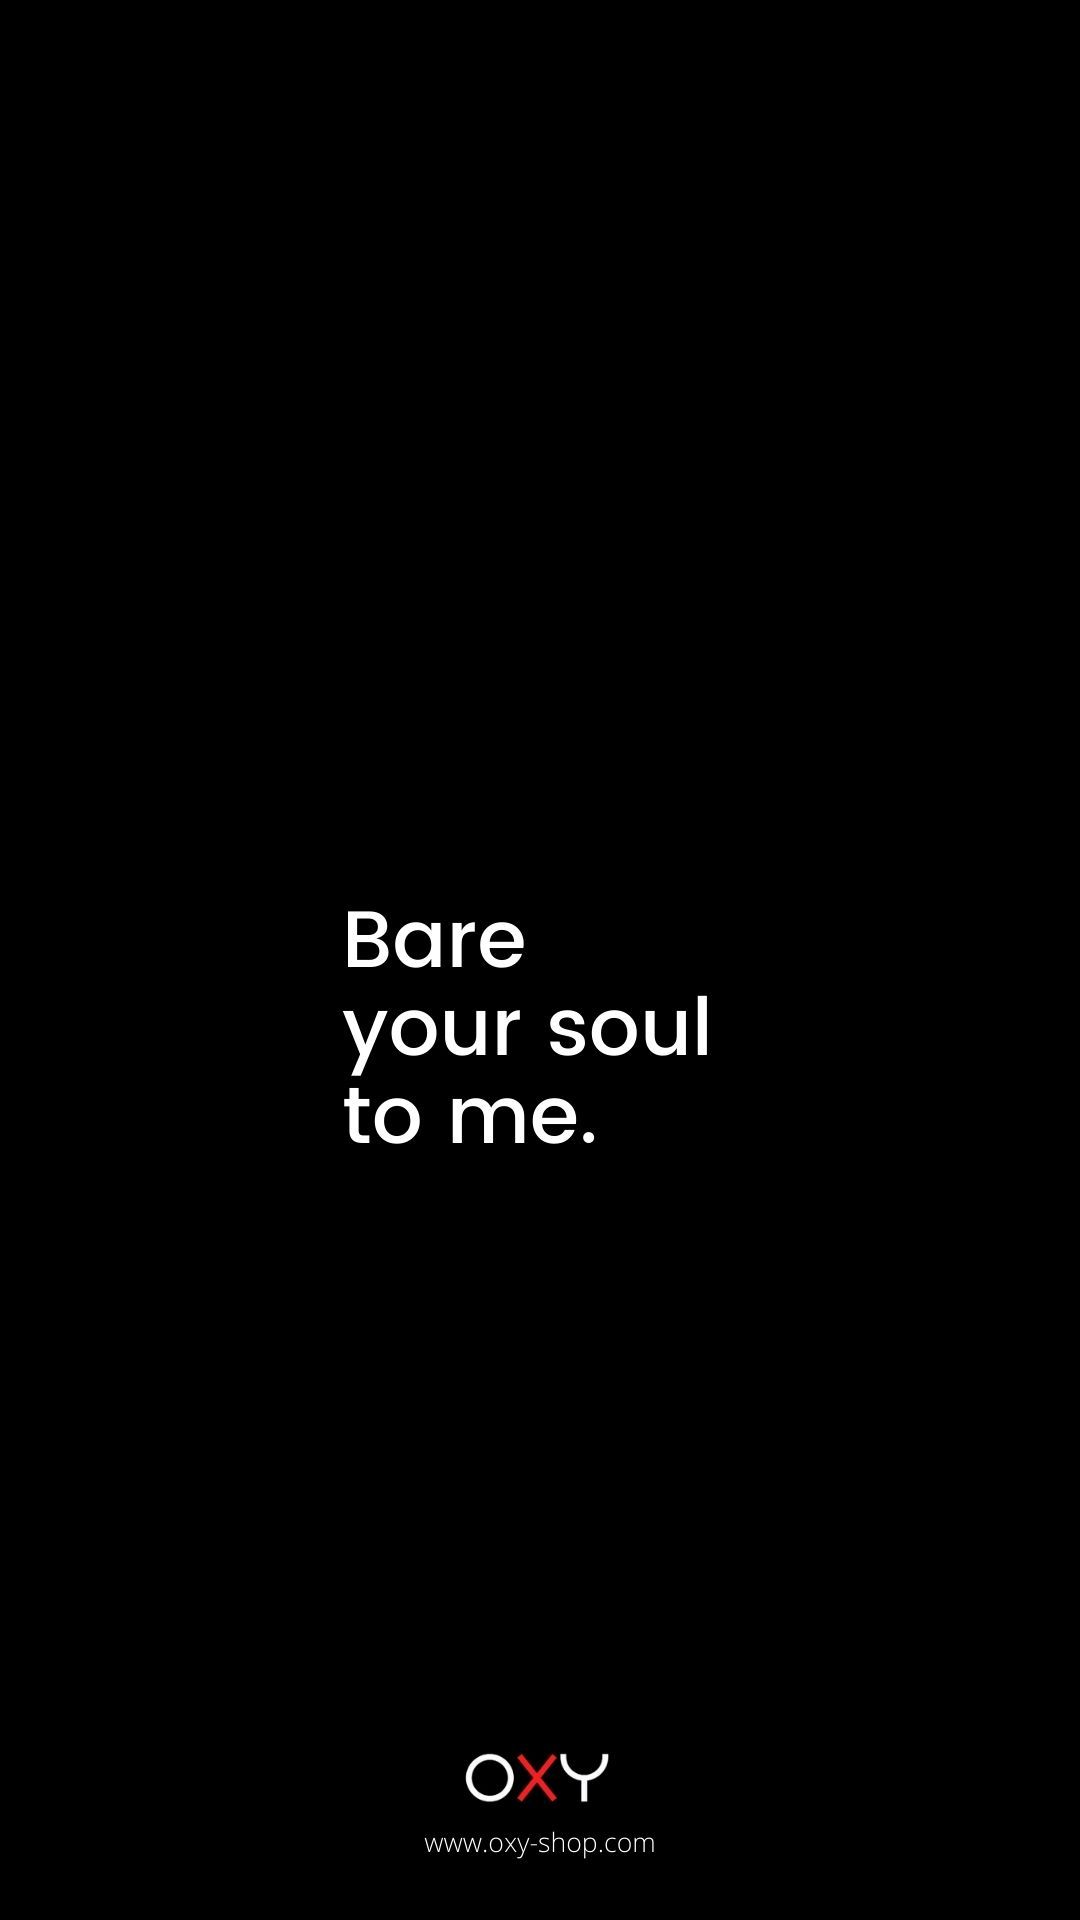 Bare your soul to me. - BDSM wallpaper